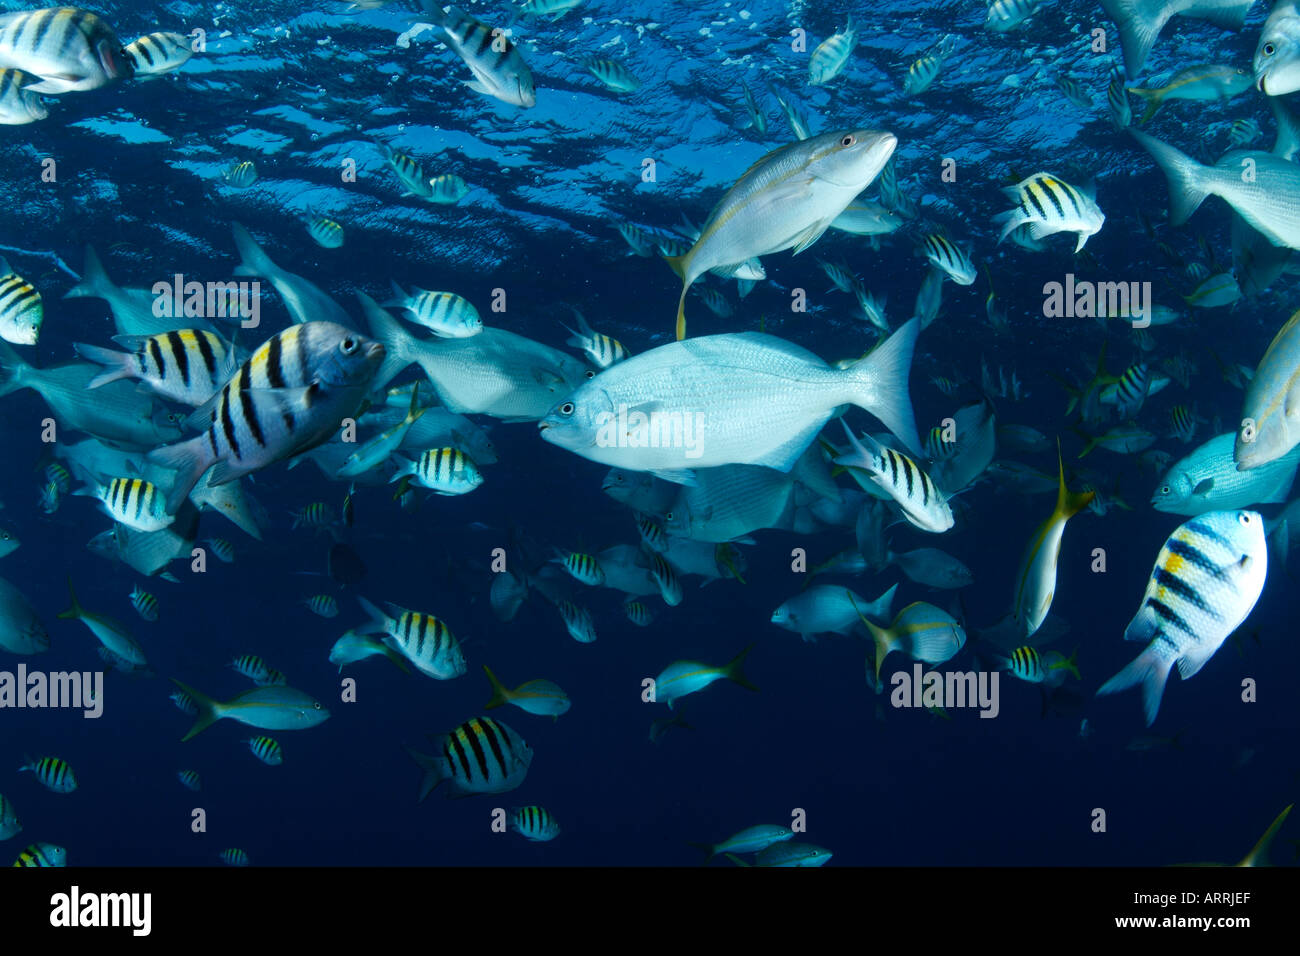 nr1689D. Sergeant Majors, Chubs, and Snappers schooling. Belize Caribbean Sea. Photo Copyright Brandon Cole Stock Photo